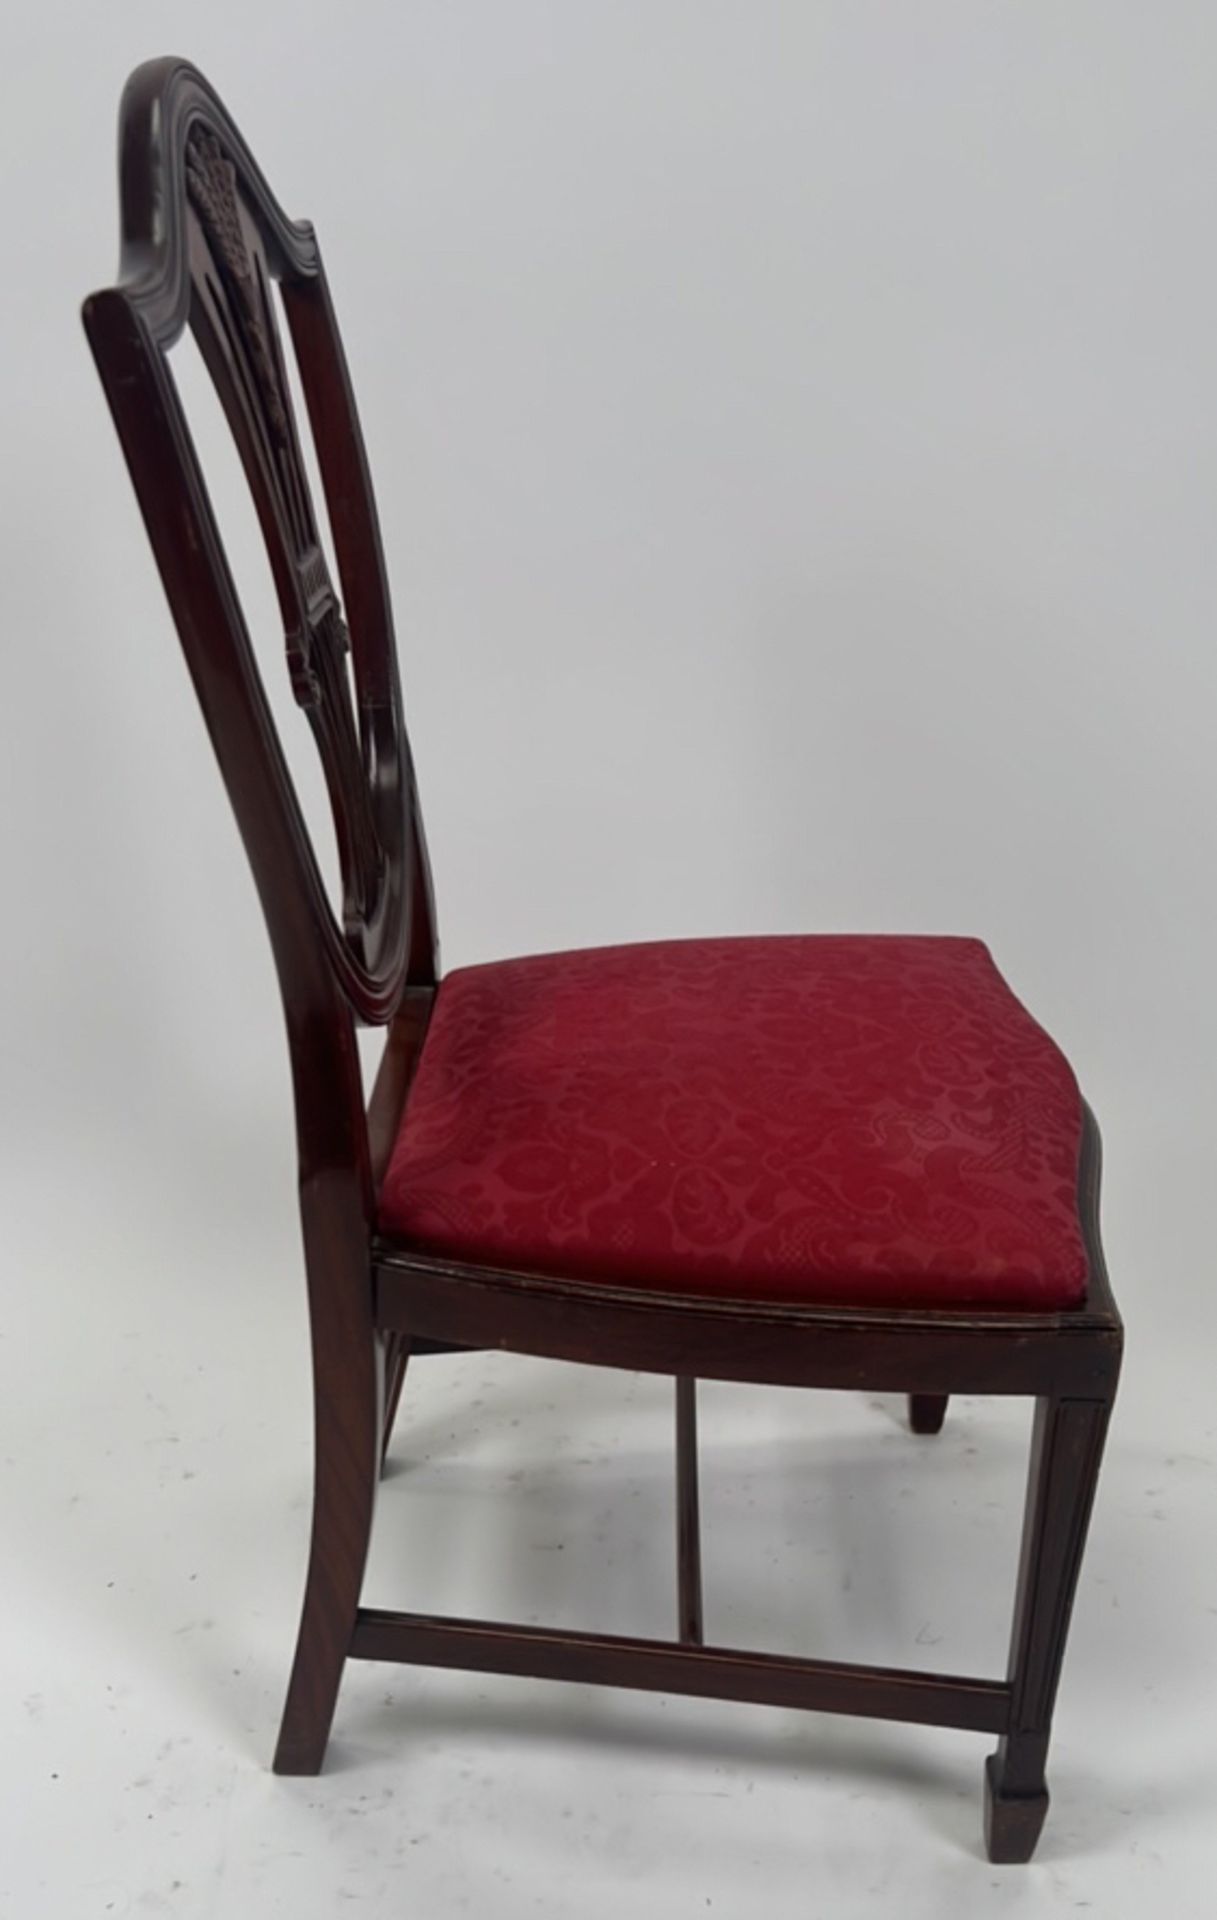 Contemporary Dining Chair - Image 3 of 12